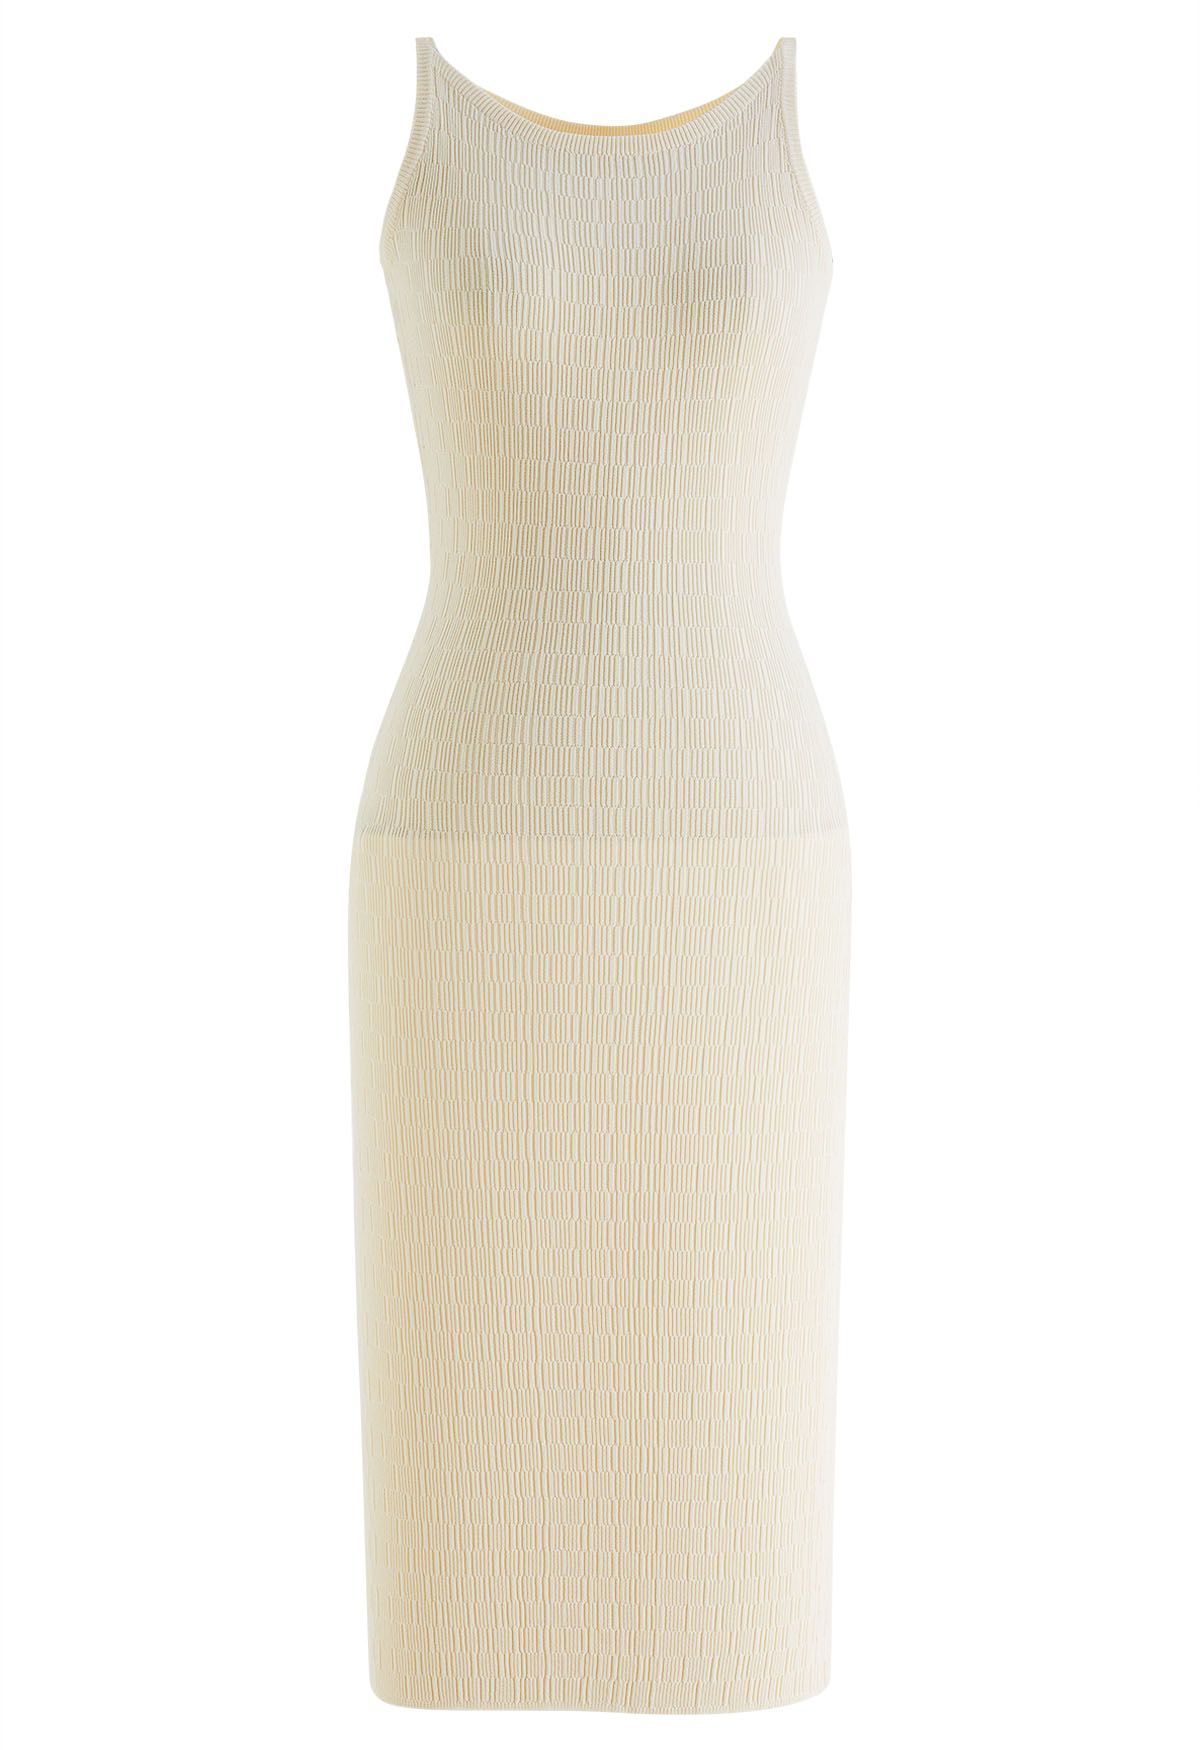 Solid Color Textured Knit Cami Dress in Cream | Chicwish